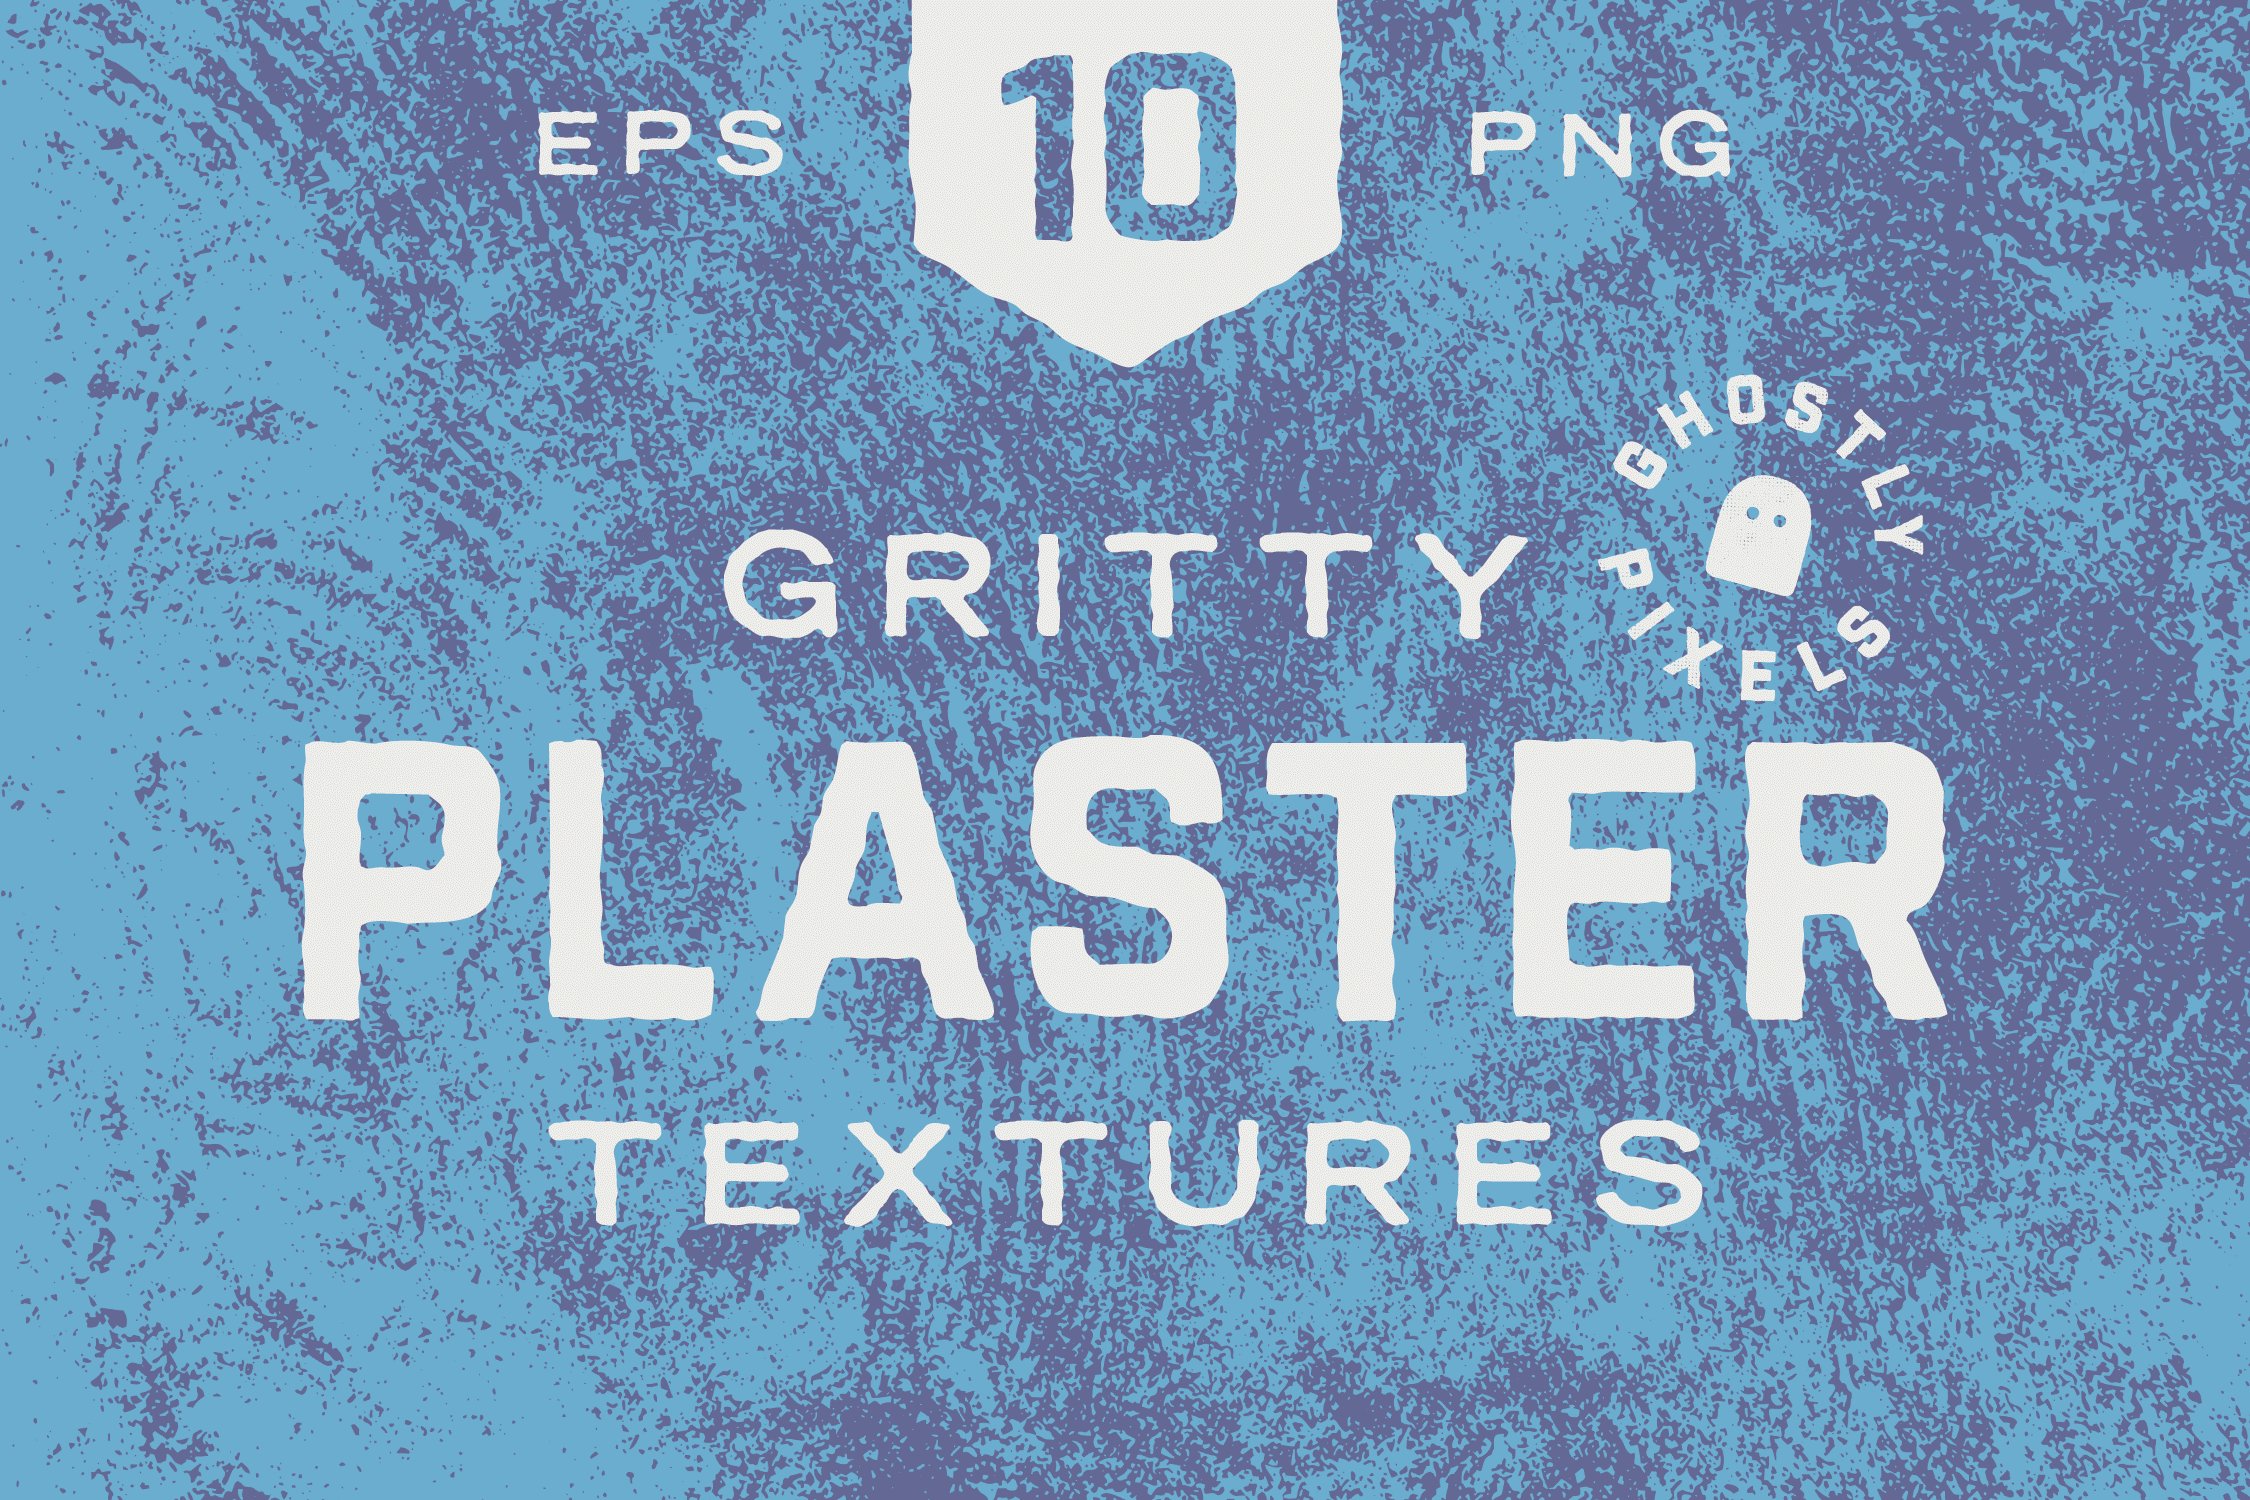 Gritty Plaster Textures cover image.